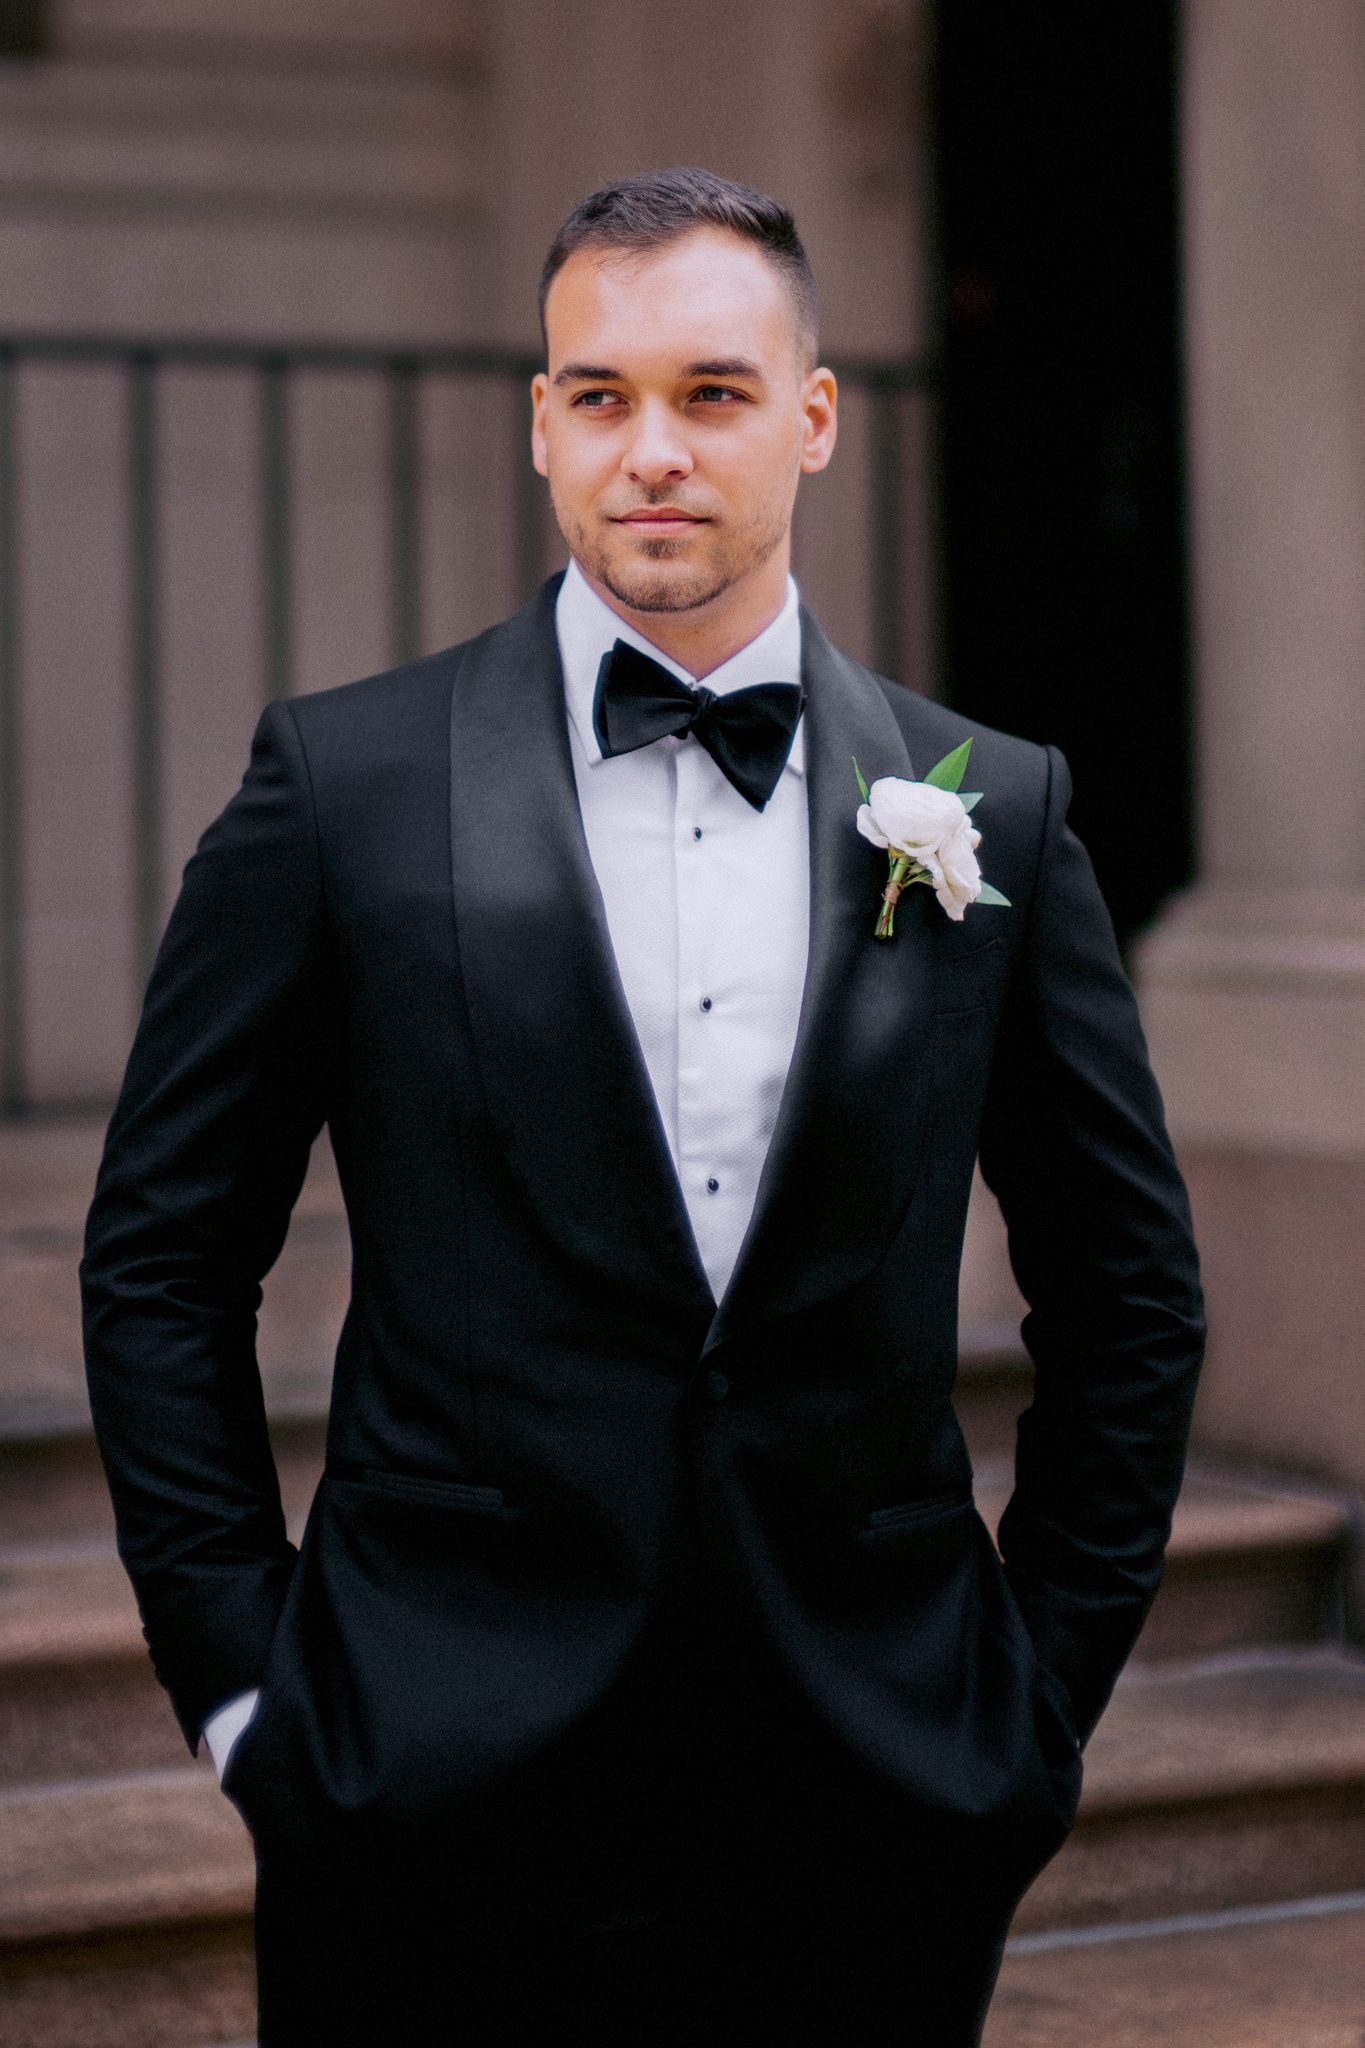 Man wearing a suit with a white boutonniere on wedding day at Providence Public Library